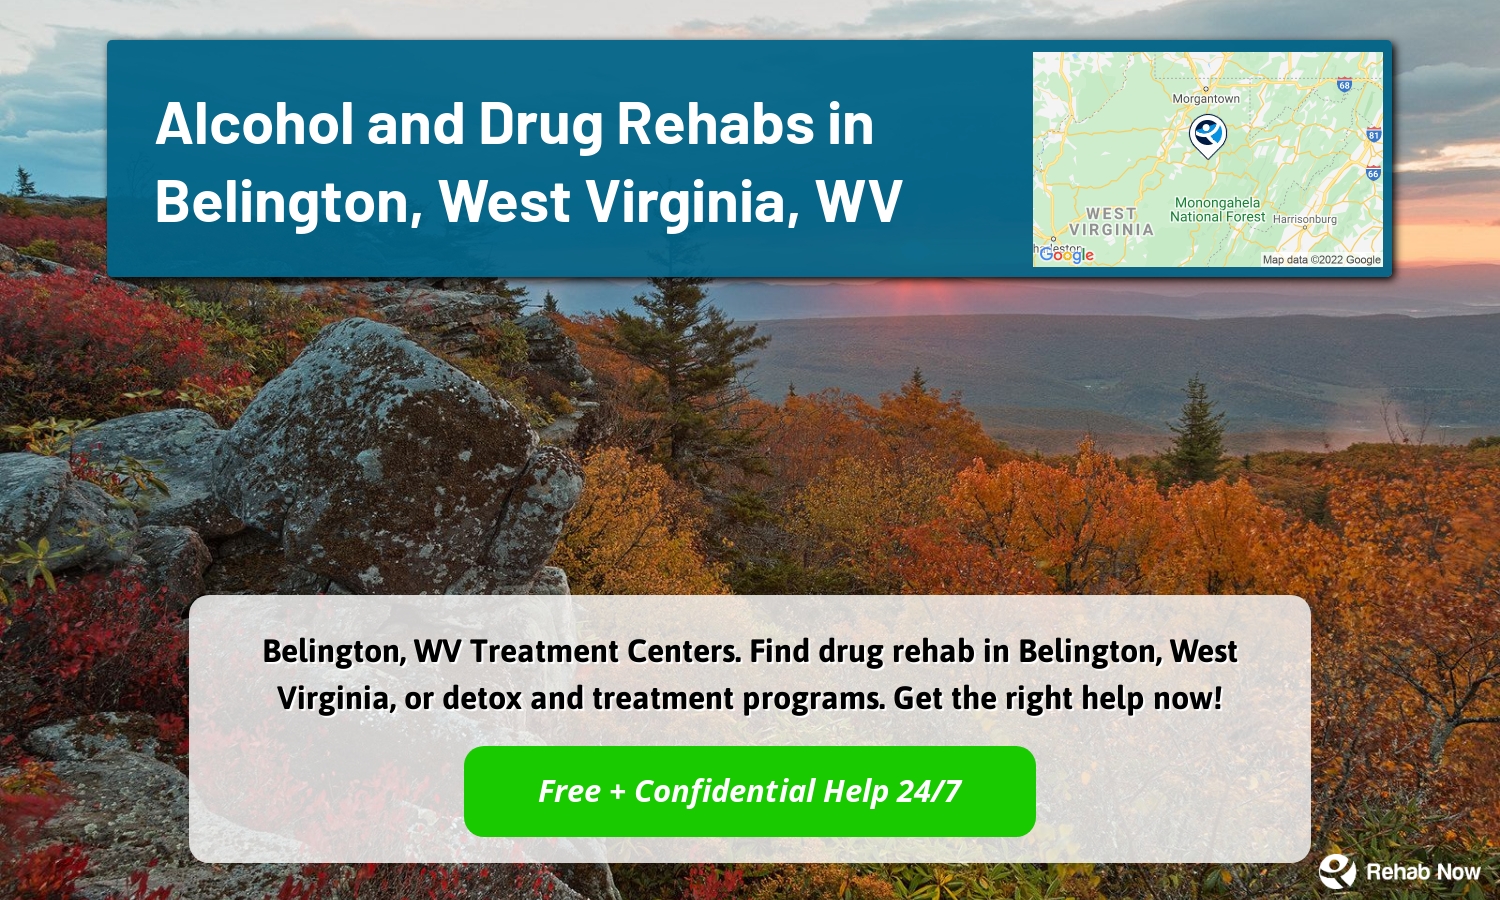 Belington, WV Treatment Centers. Find drug rehab in Belington, West Virginia, or detox and treatment programs. Get the right help now!